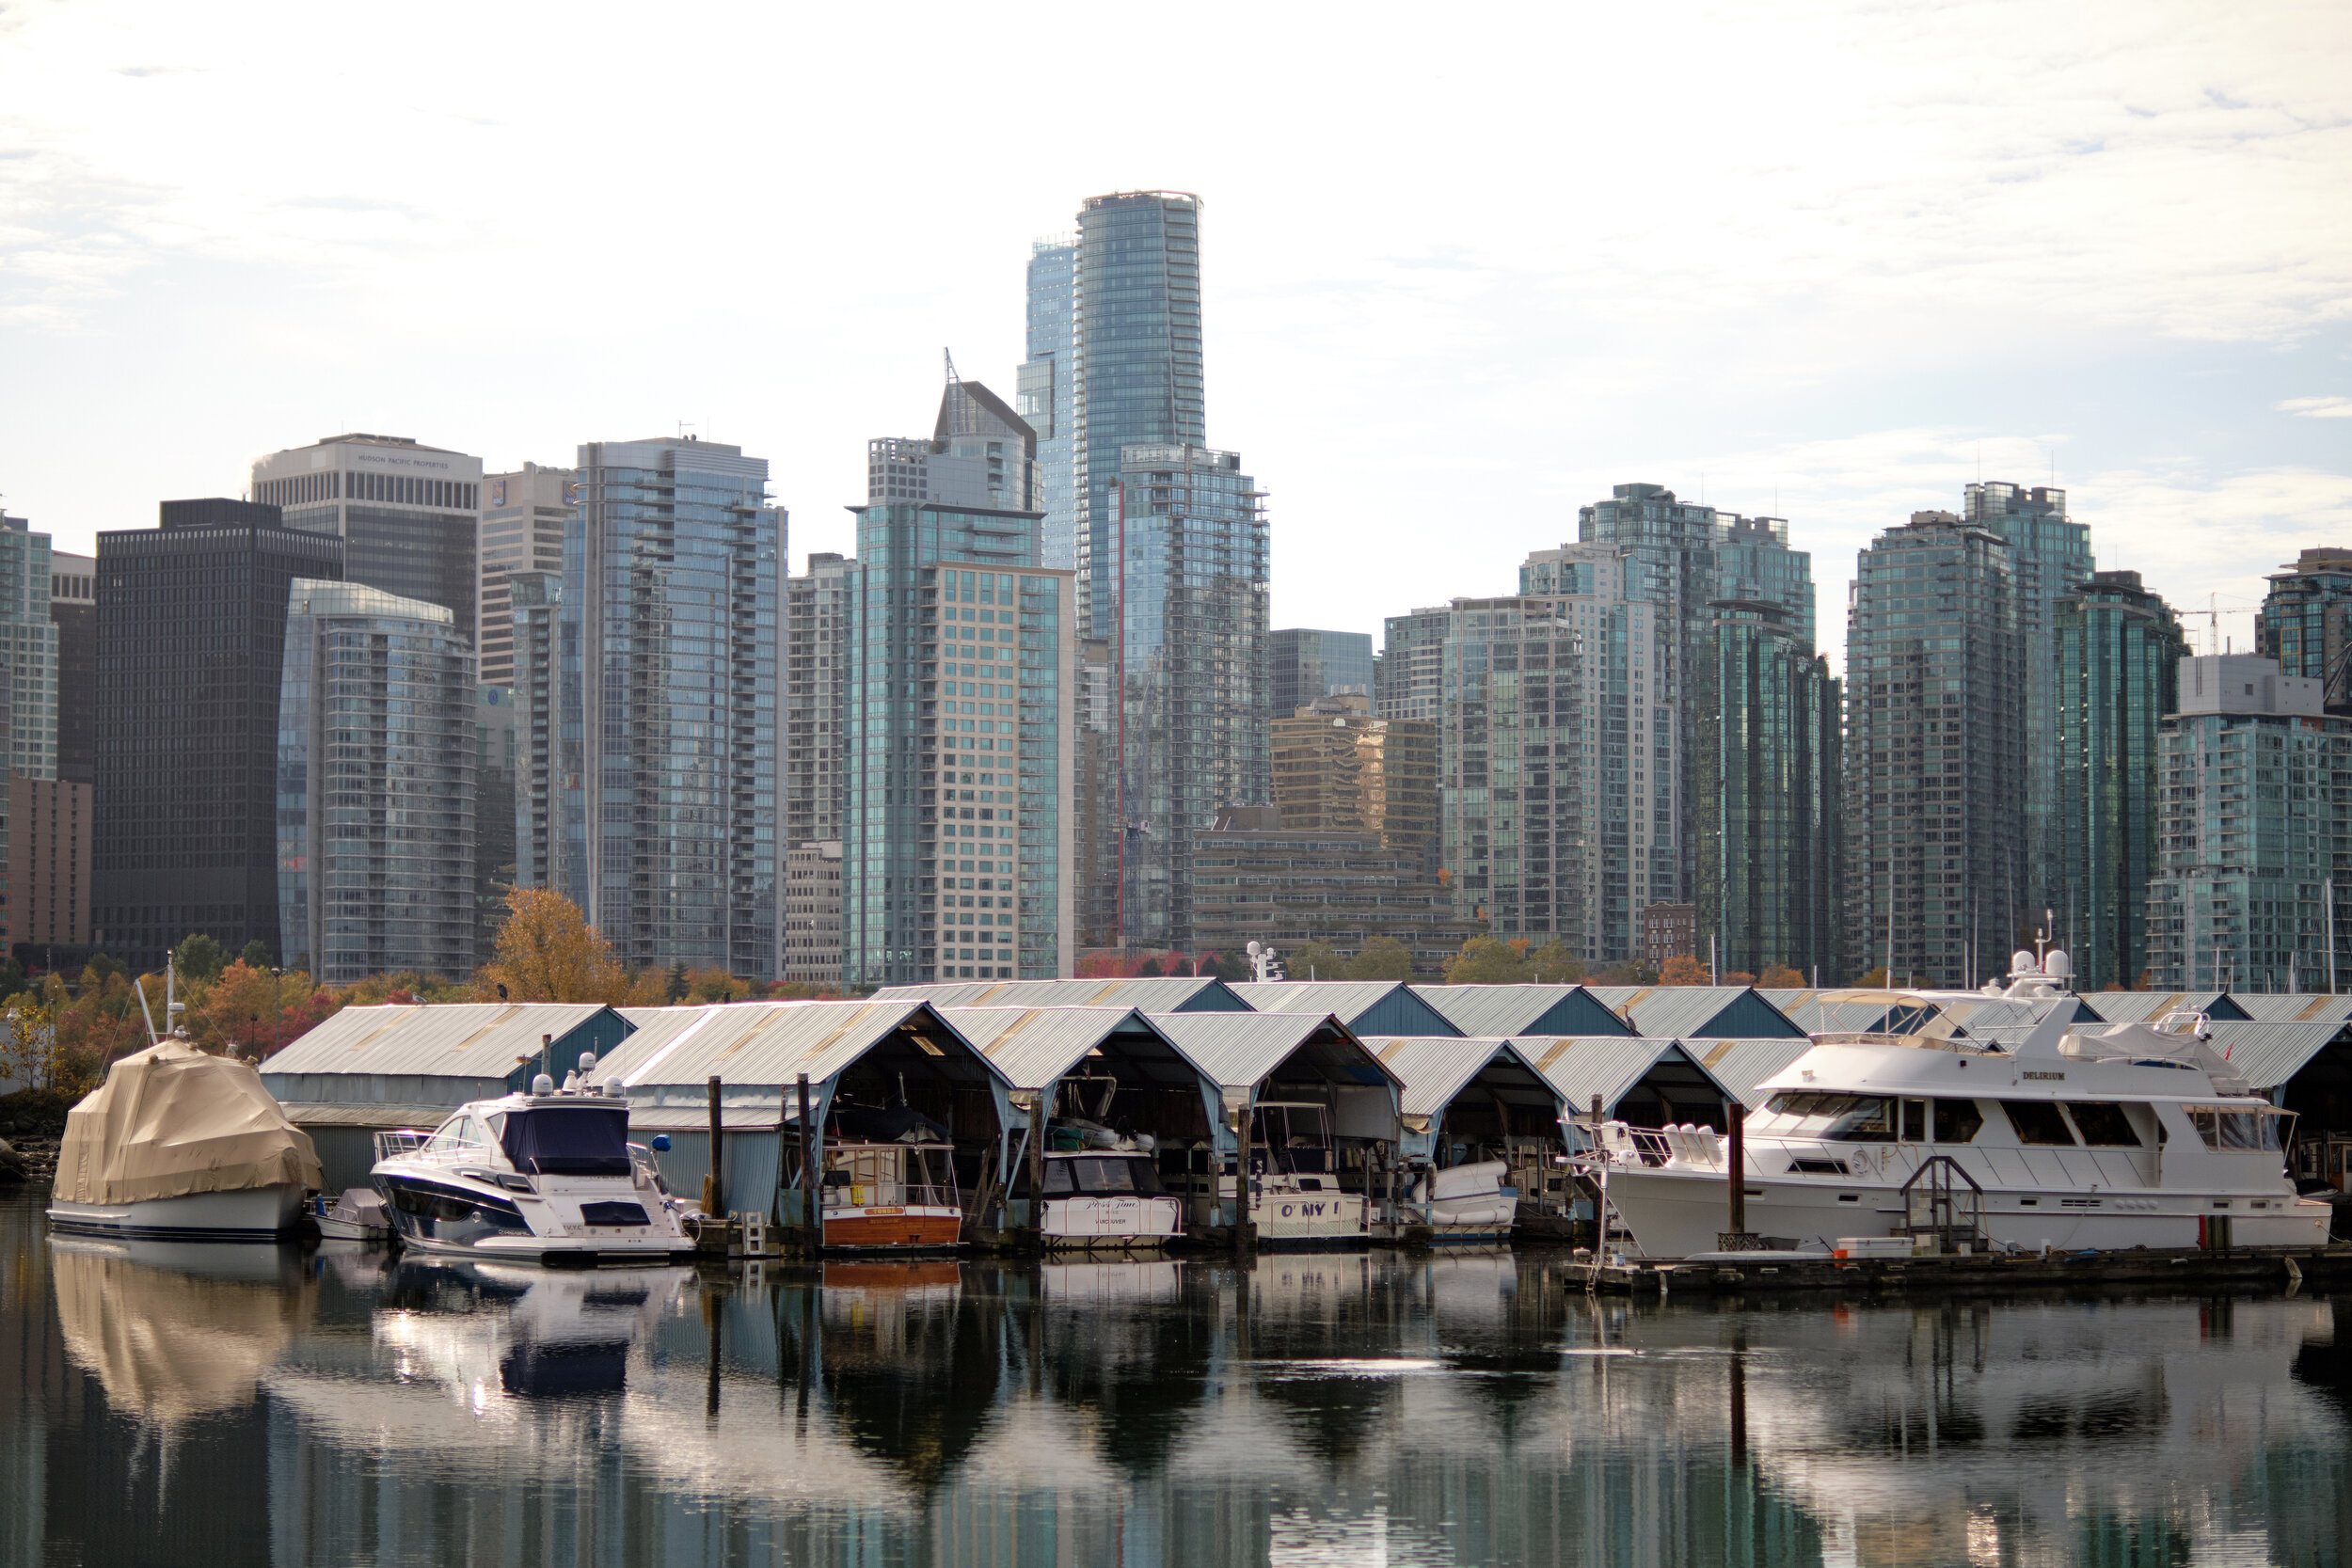 Coal Harbour in Vancouver. Sample image from a Fujifilm XF 50mm f/1 R WR